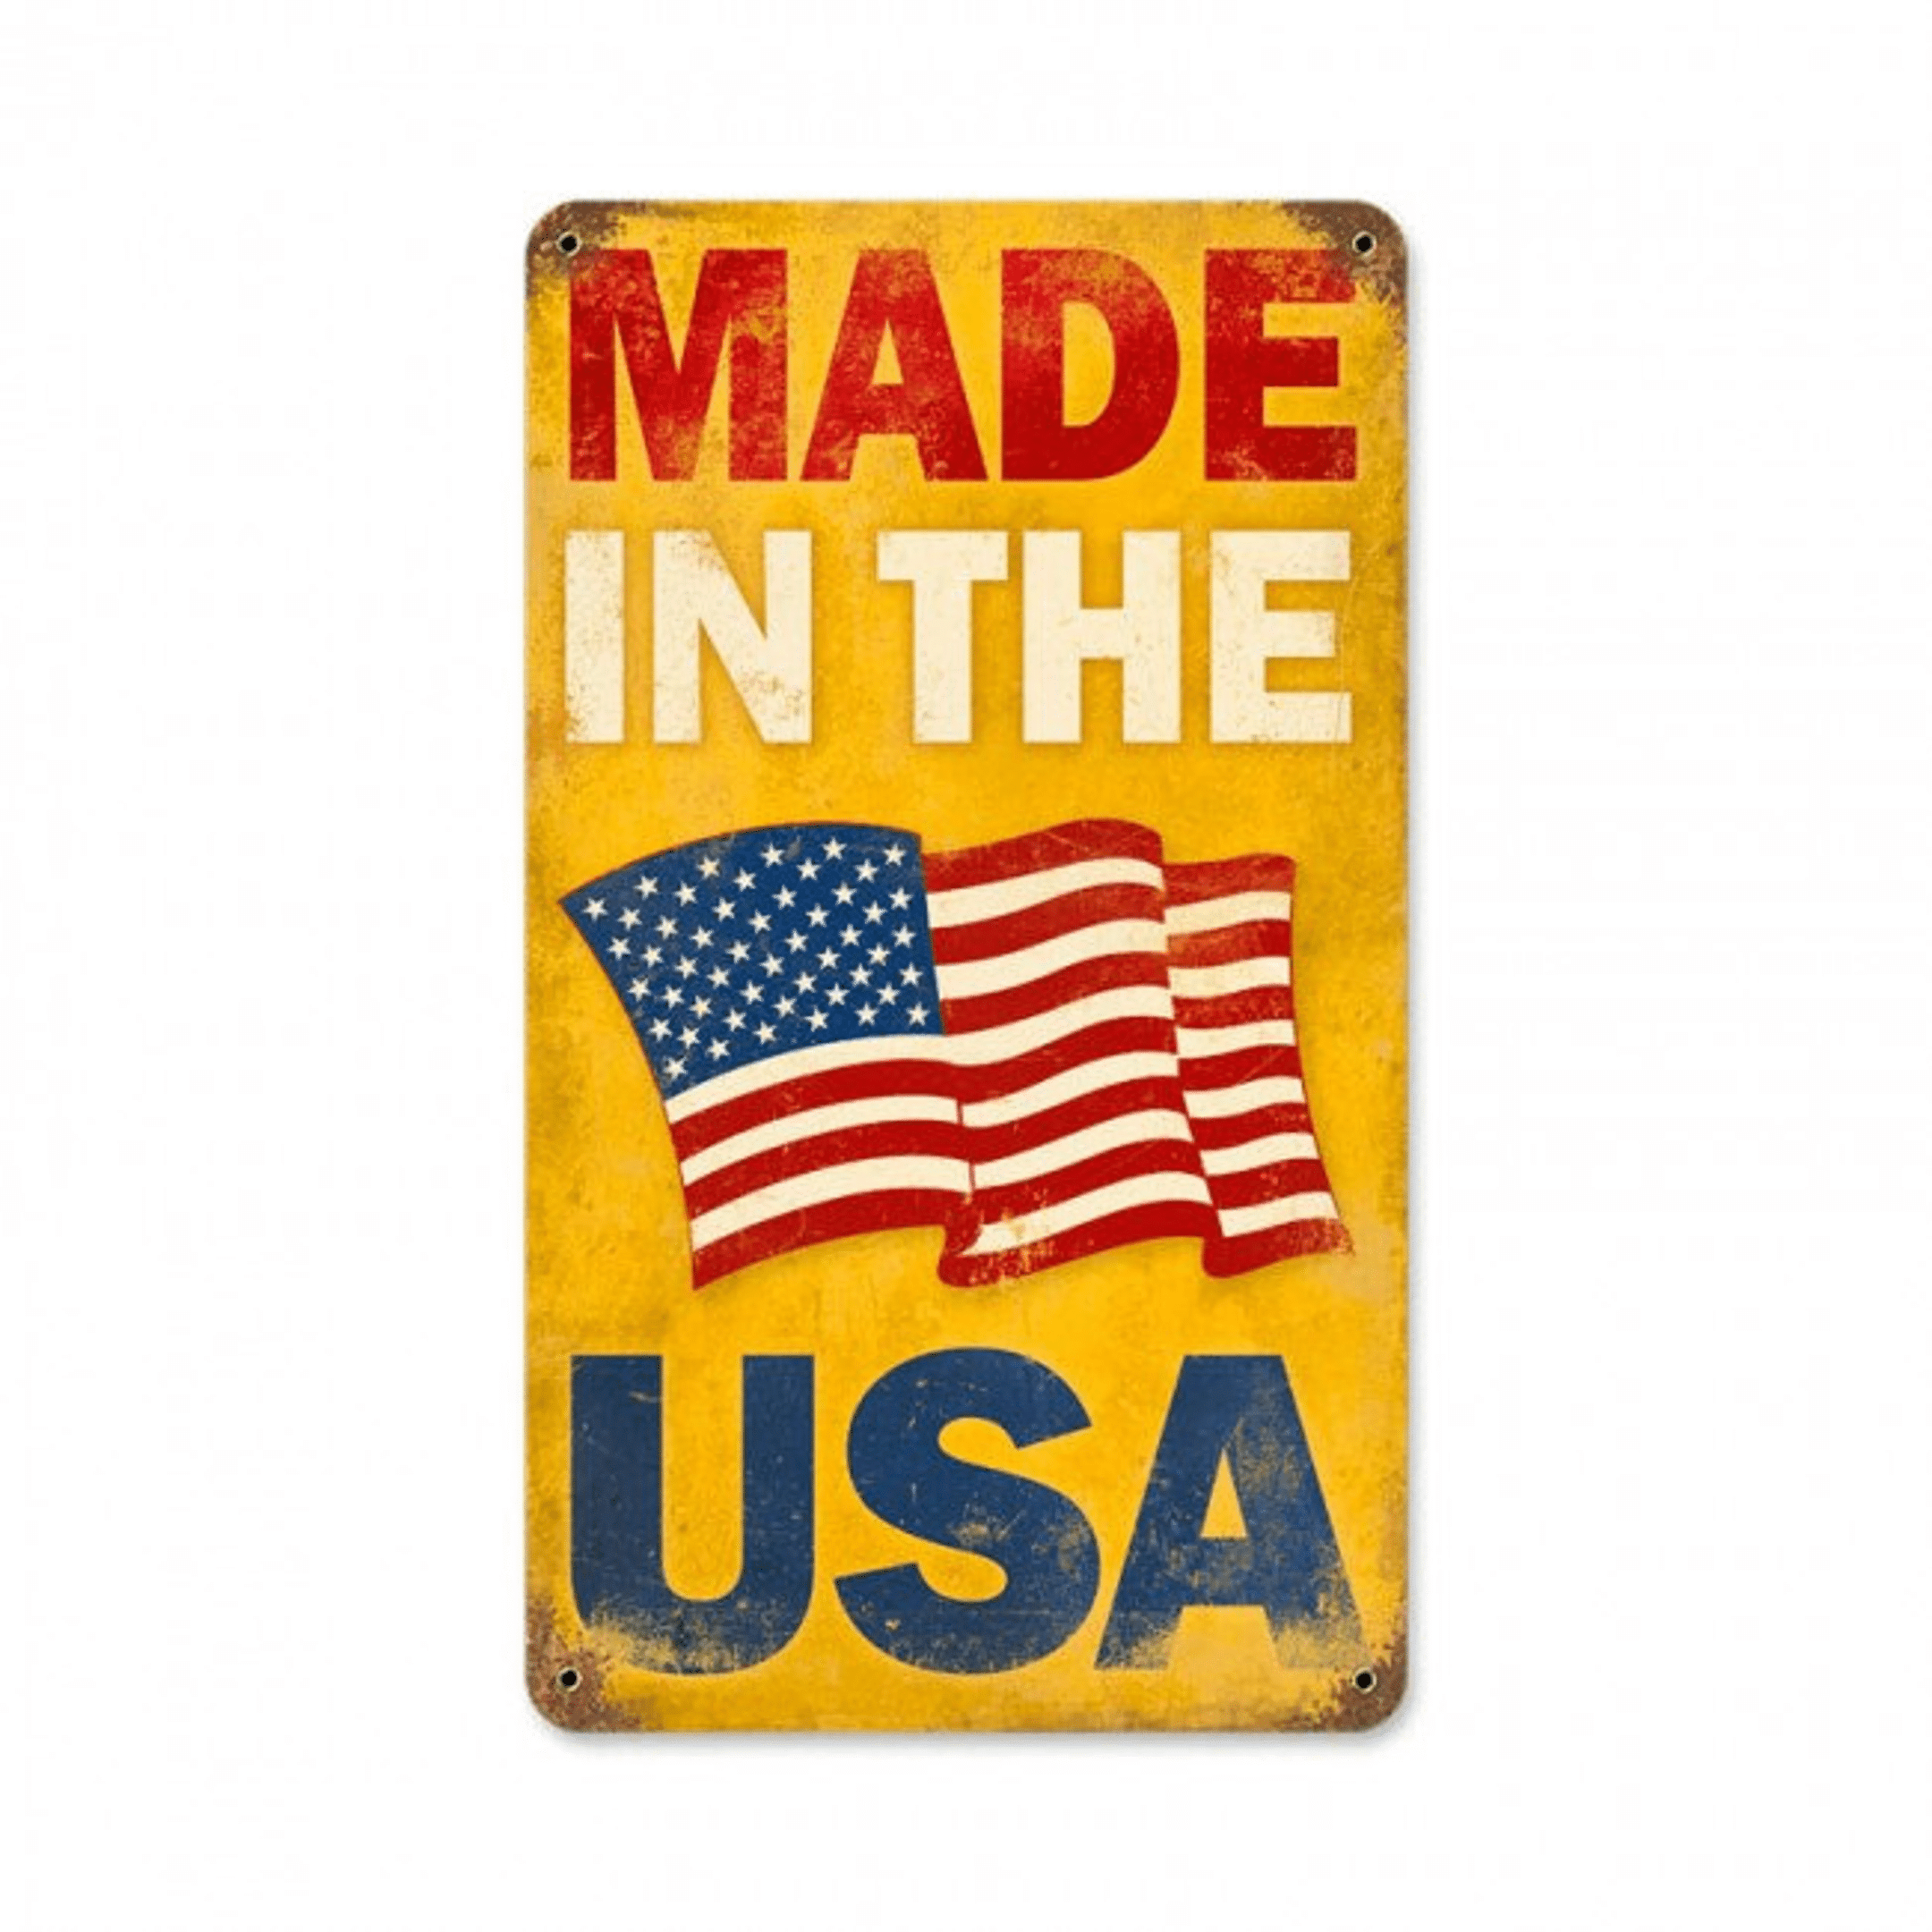 Truck Flag US Flag Antique Vintage Truck satin metal sign 2 Sizes vintage style country home decor wall art lane ps